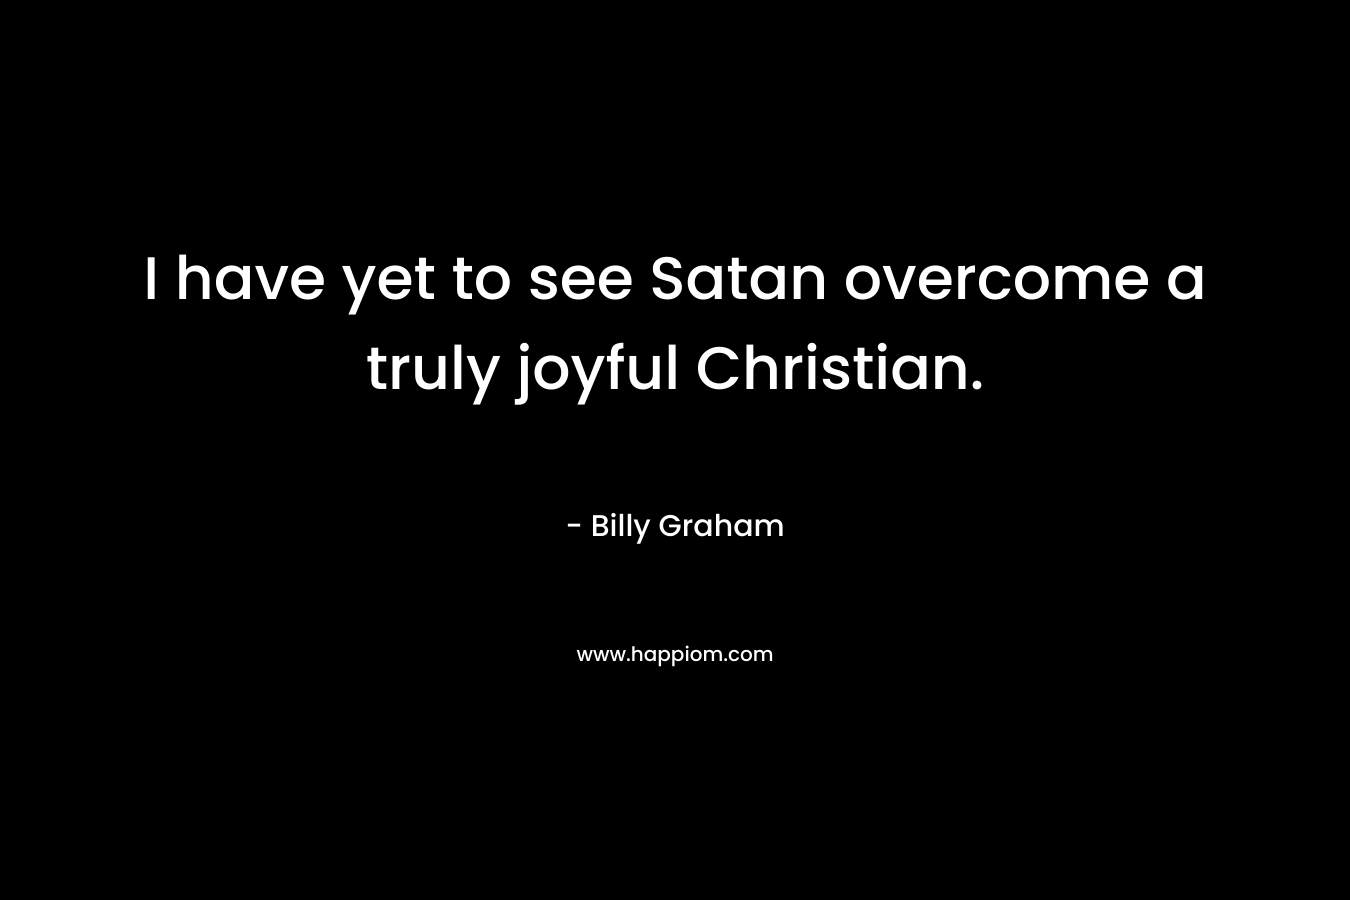 I have yet to see Satan overcome a truly joyful Christian.